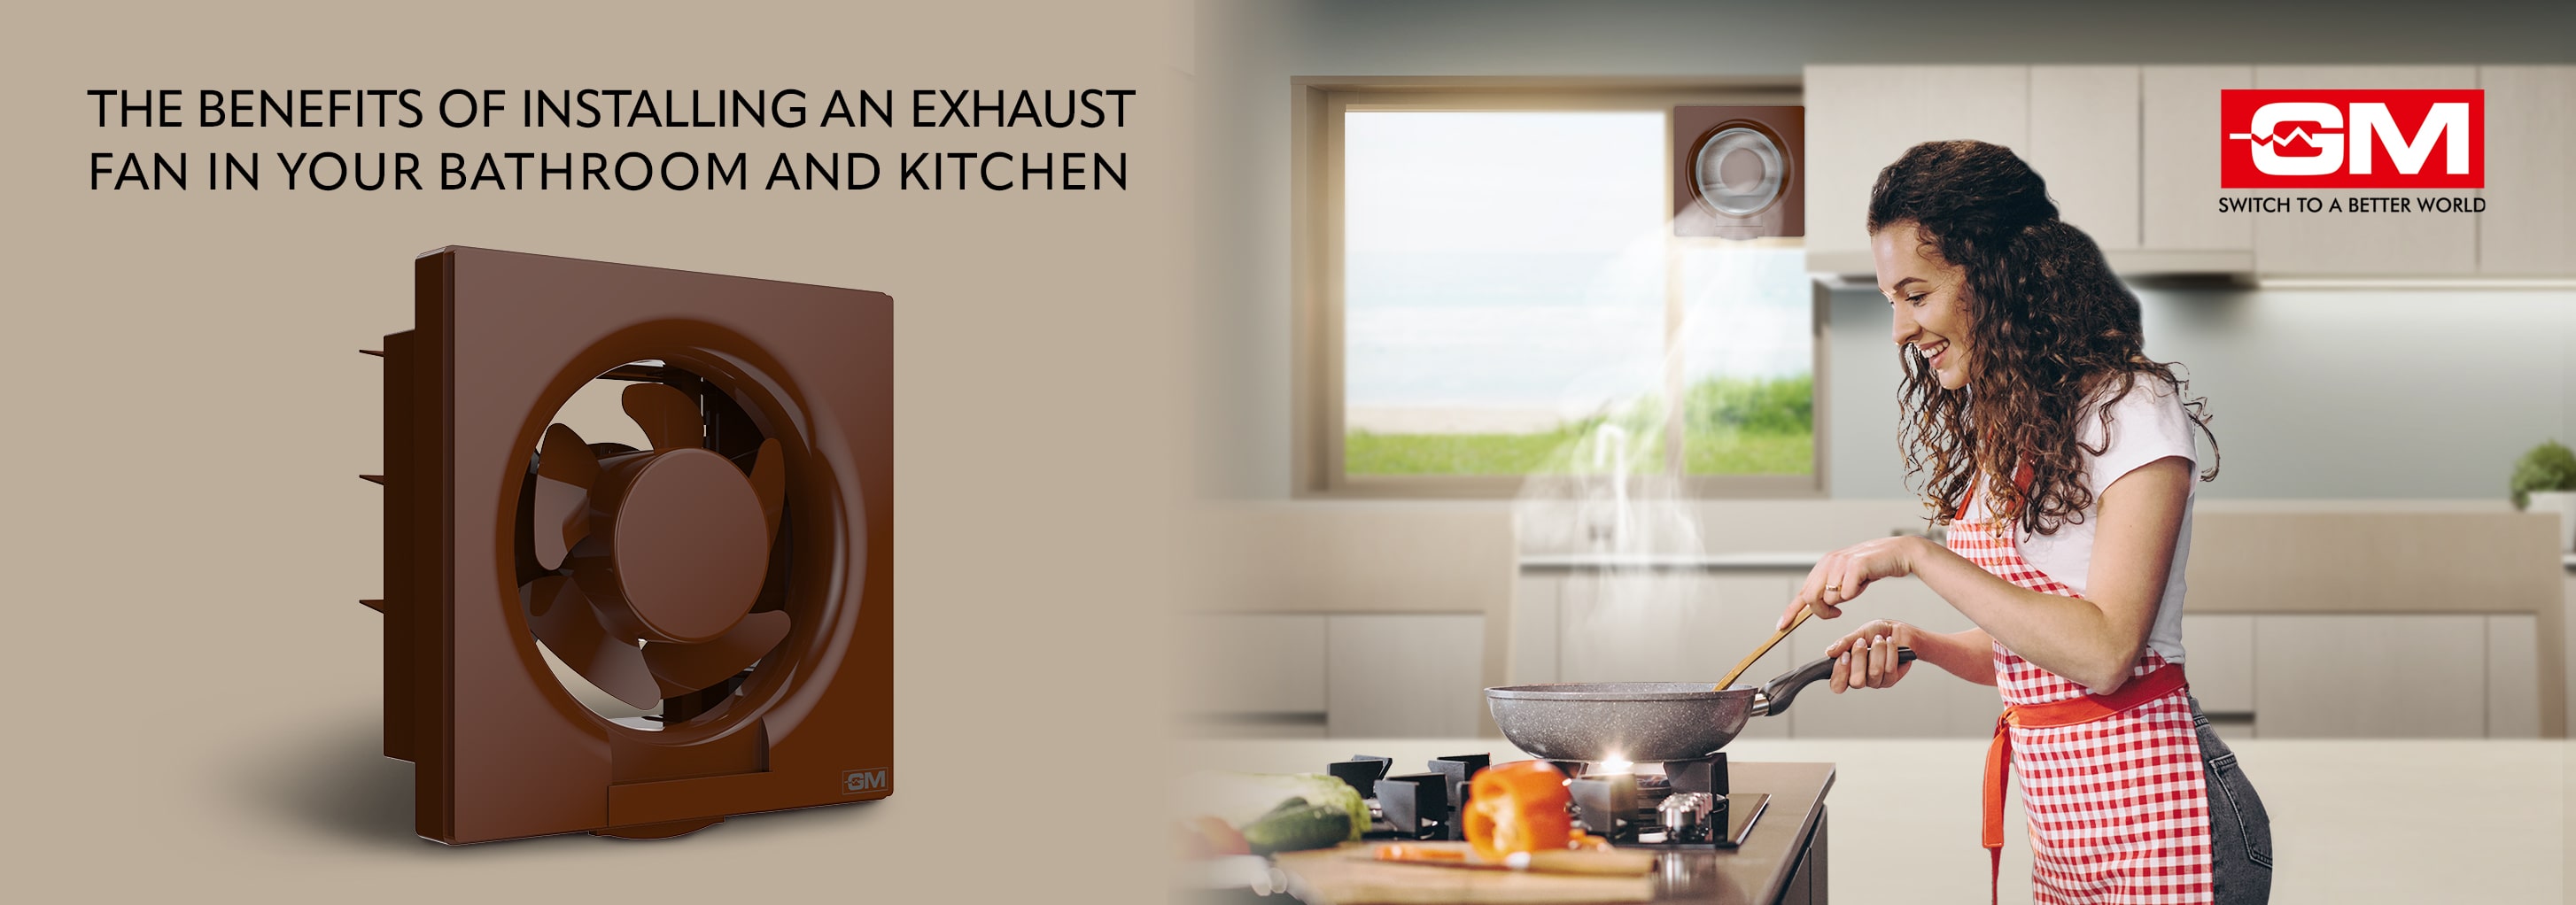 The Benefits of Installing an Exhaust Fan in Your Bathroom & Kitchen